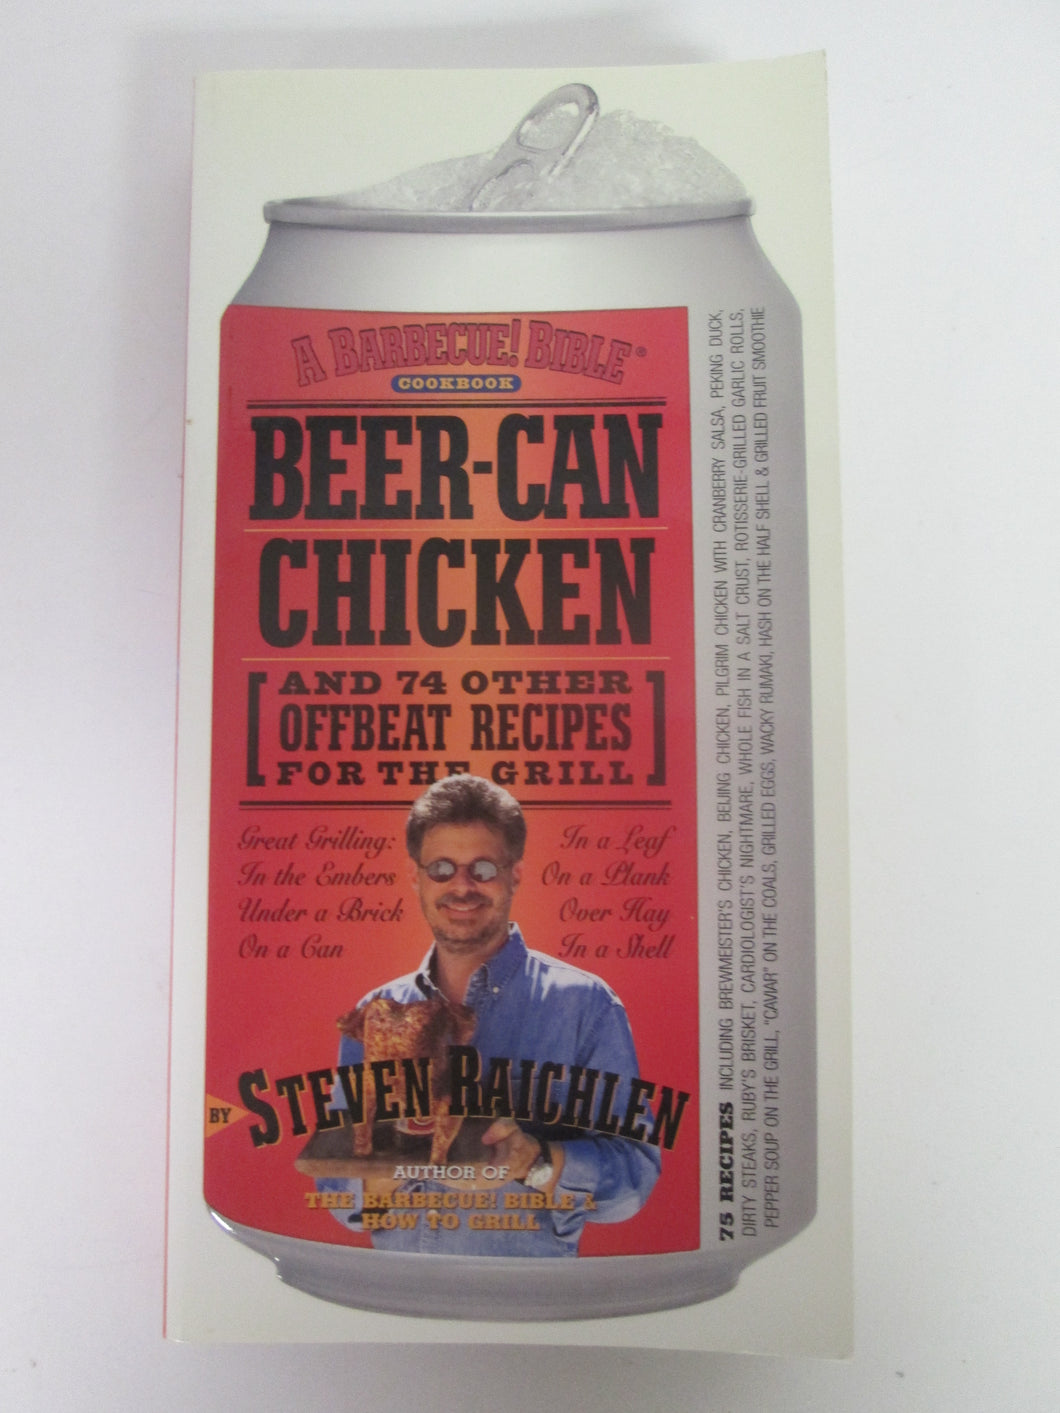 Beer-Can Chicken & 74 Other Offbeat Recipes for the Grill by Stephen Raichlen 2002 PB